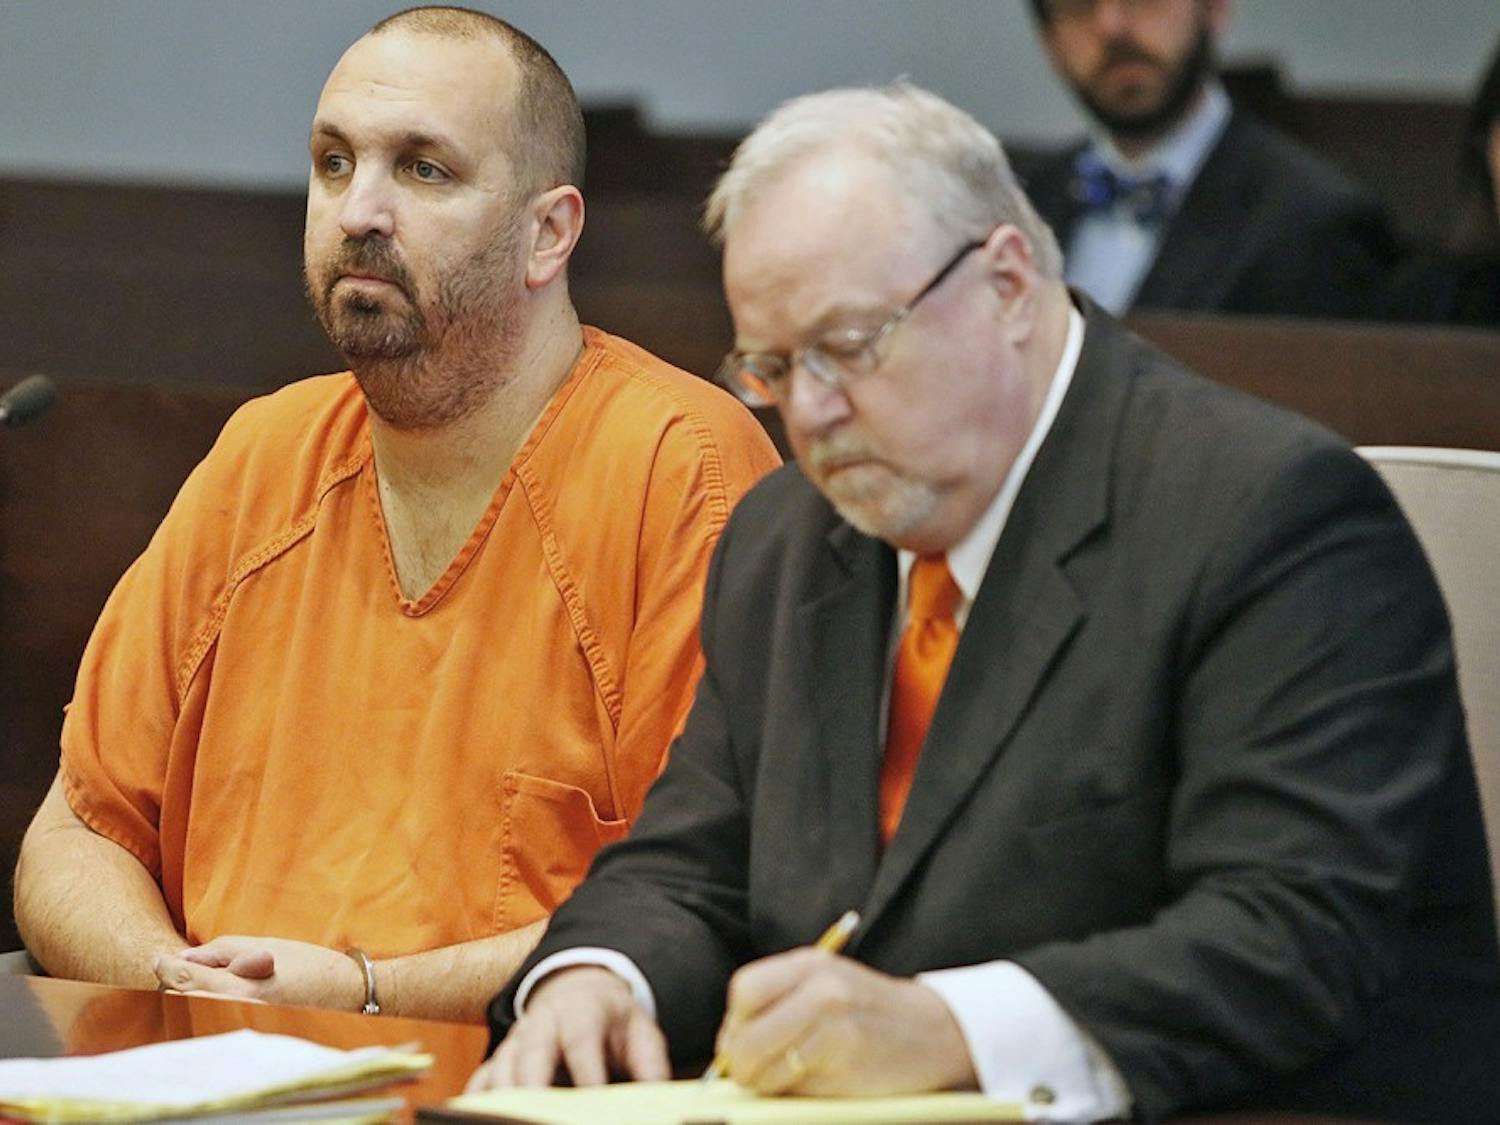 Murder defendant Craig Stephen Hicks, 46, left, listens while his co-defense counsel Terry Alford makes notes during a Monday, April 6, 2015 death penalty hearing for Hicks in Durham, N.C. Presiding Judge Orlando Hudson found the shooting deaths of three Muslim college students at Finley Forest residential complex in Chapel Hill in February 2015 made the Hicks case eligible for the death penalty. (Harry Lynch/Raleigh News &amp; Observer/TNS) 